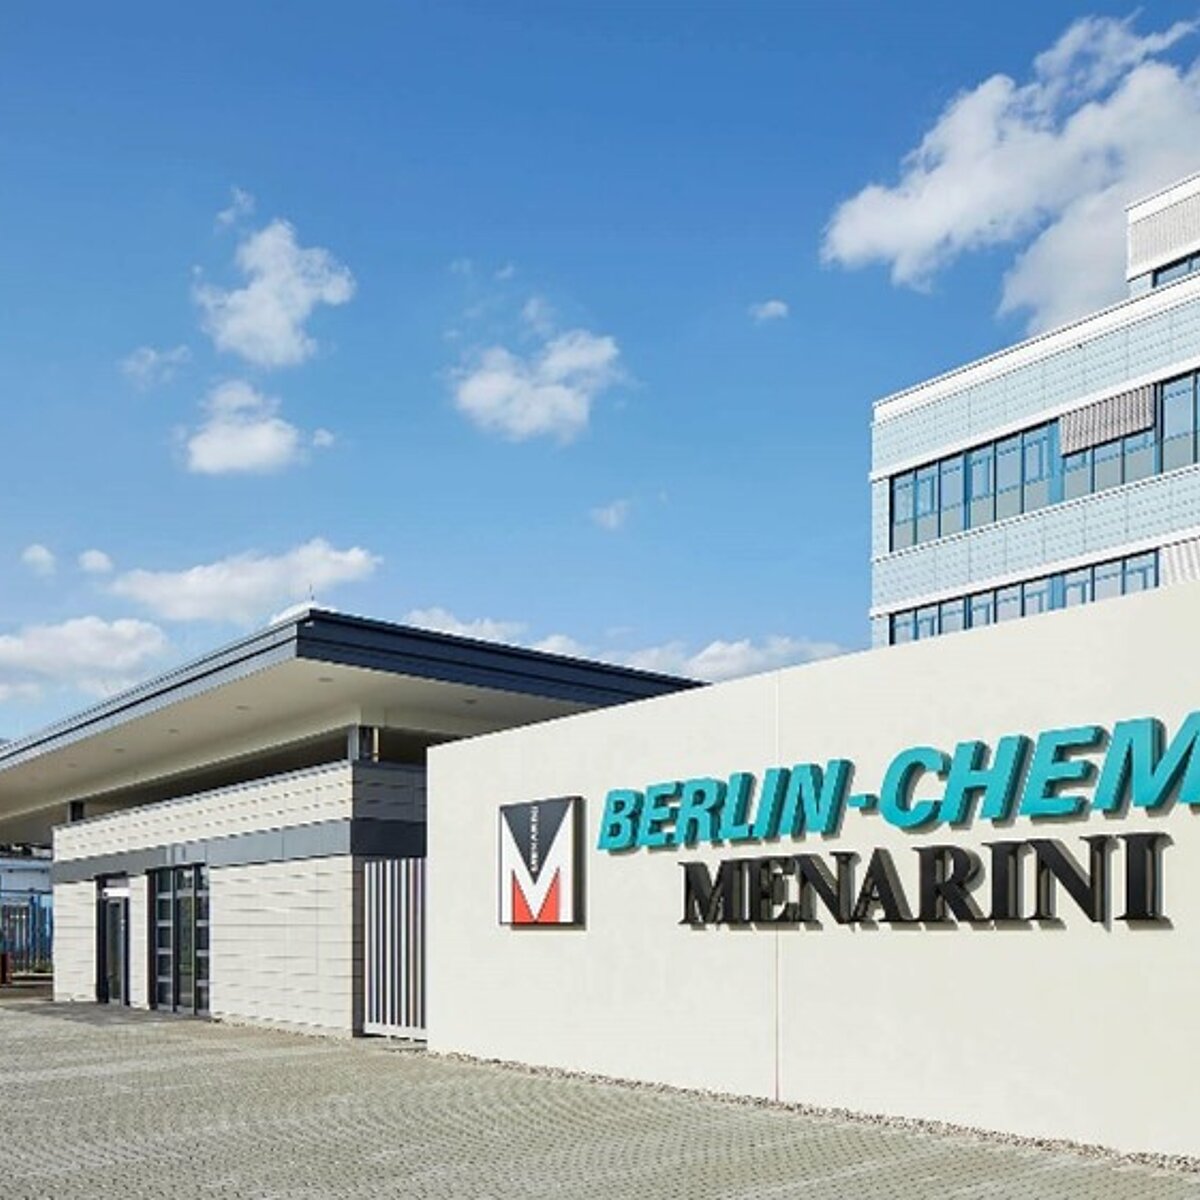 You can see the entrance gate and a part of the main building of Berlin-Chemie, a Berlin pharmaceutical company, the logo of the company is placed at the entrance, in turquoise letters.